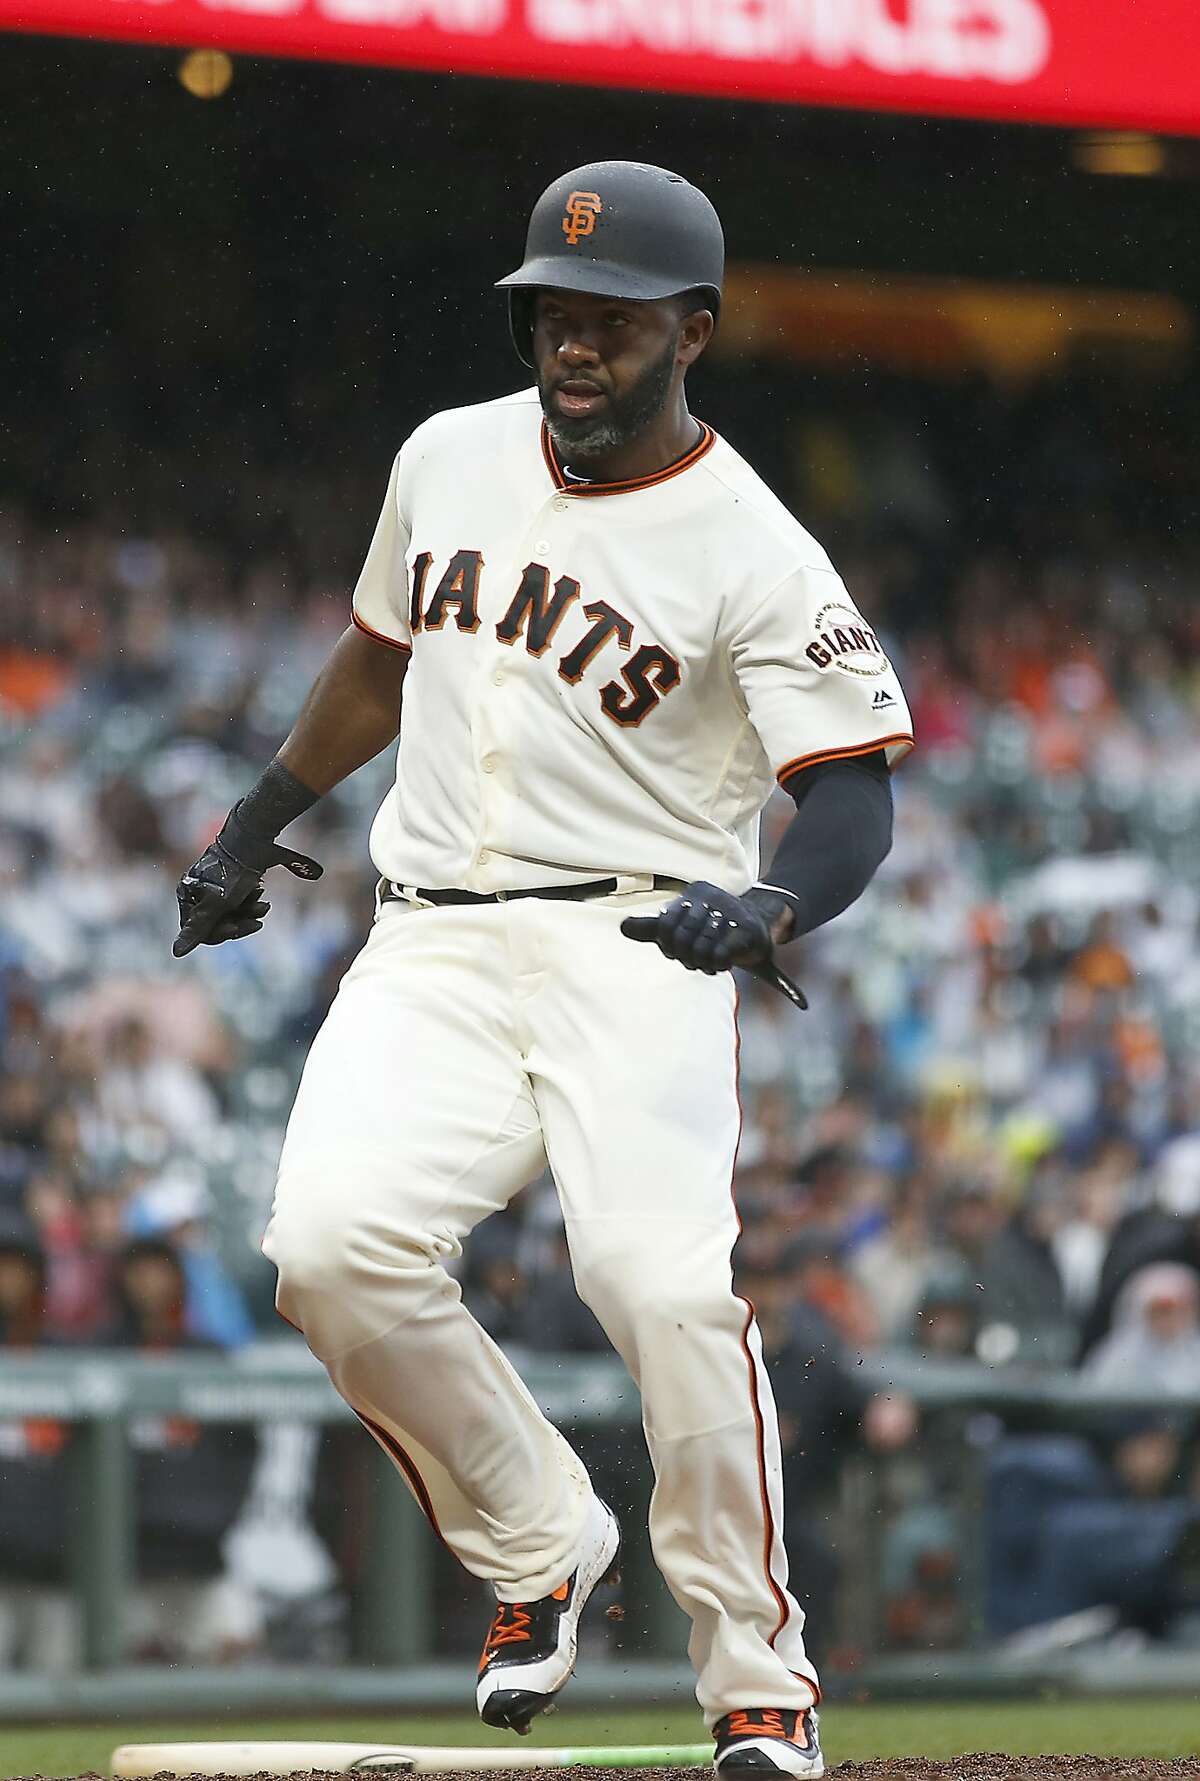 San Francisco Giants' Denard Span scores a run on a double by Brandon Belt during the first inning of a baseball game, Sunday, April 16, 2017, in San Francisco. (AP Photo/Tony Avelar)